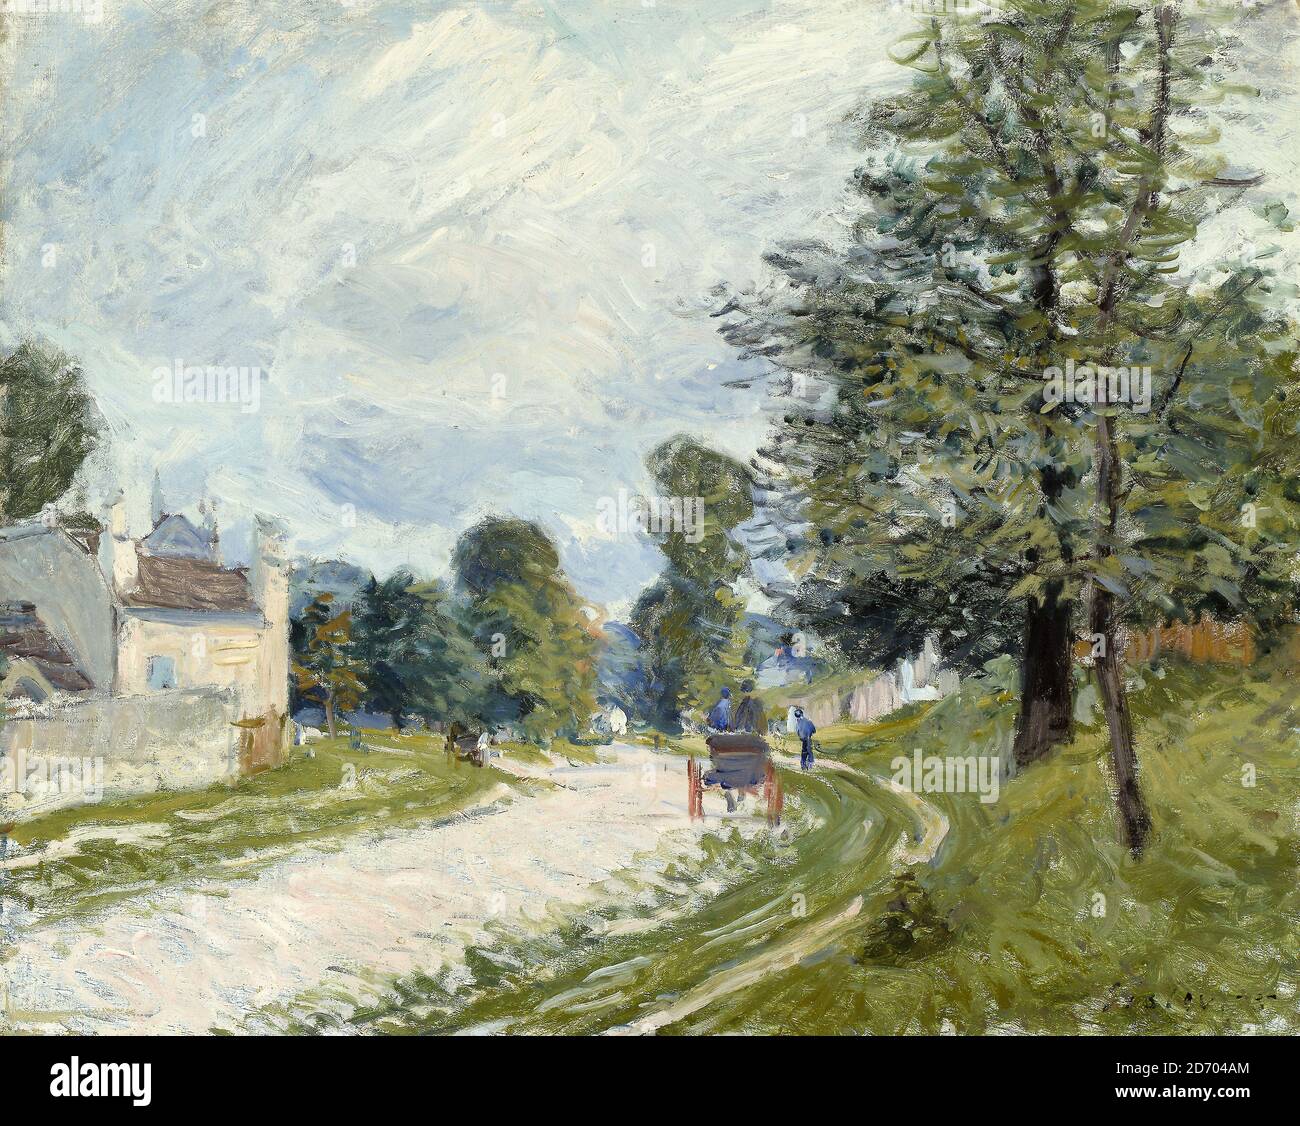 Alfred Sisley, A Turn in the Road, landscape painting, 1873 Stock Photo